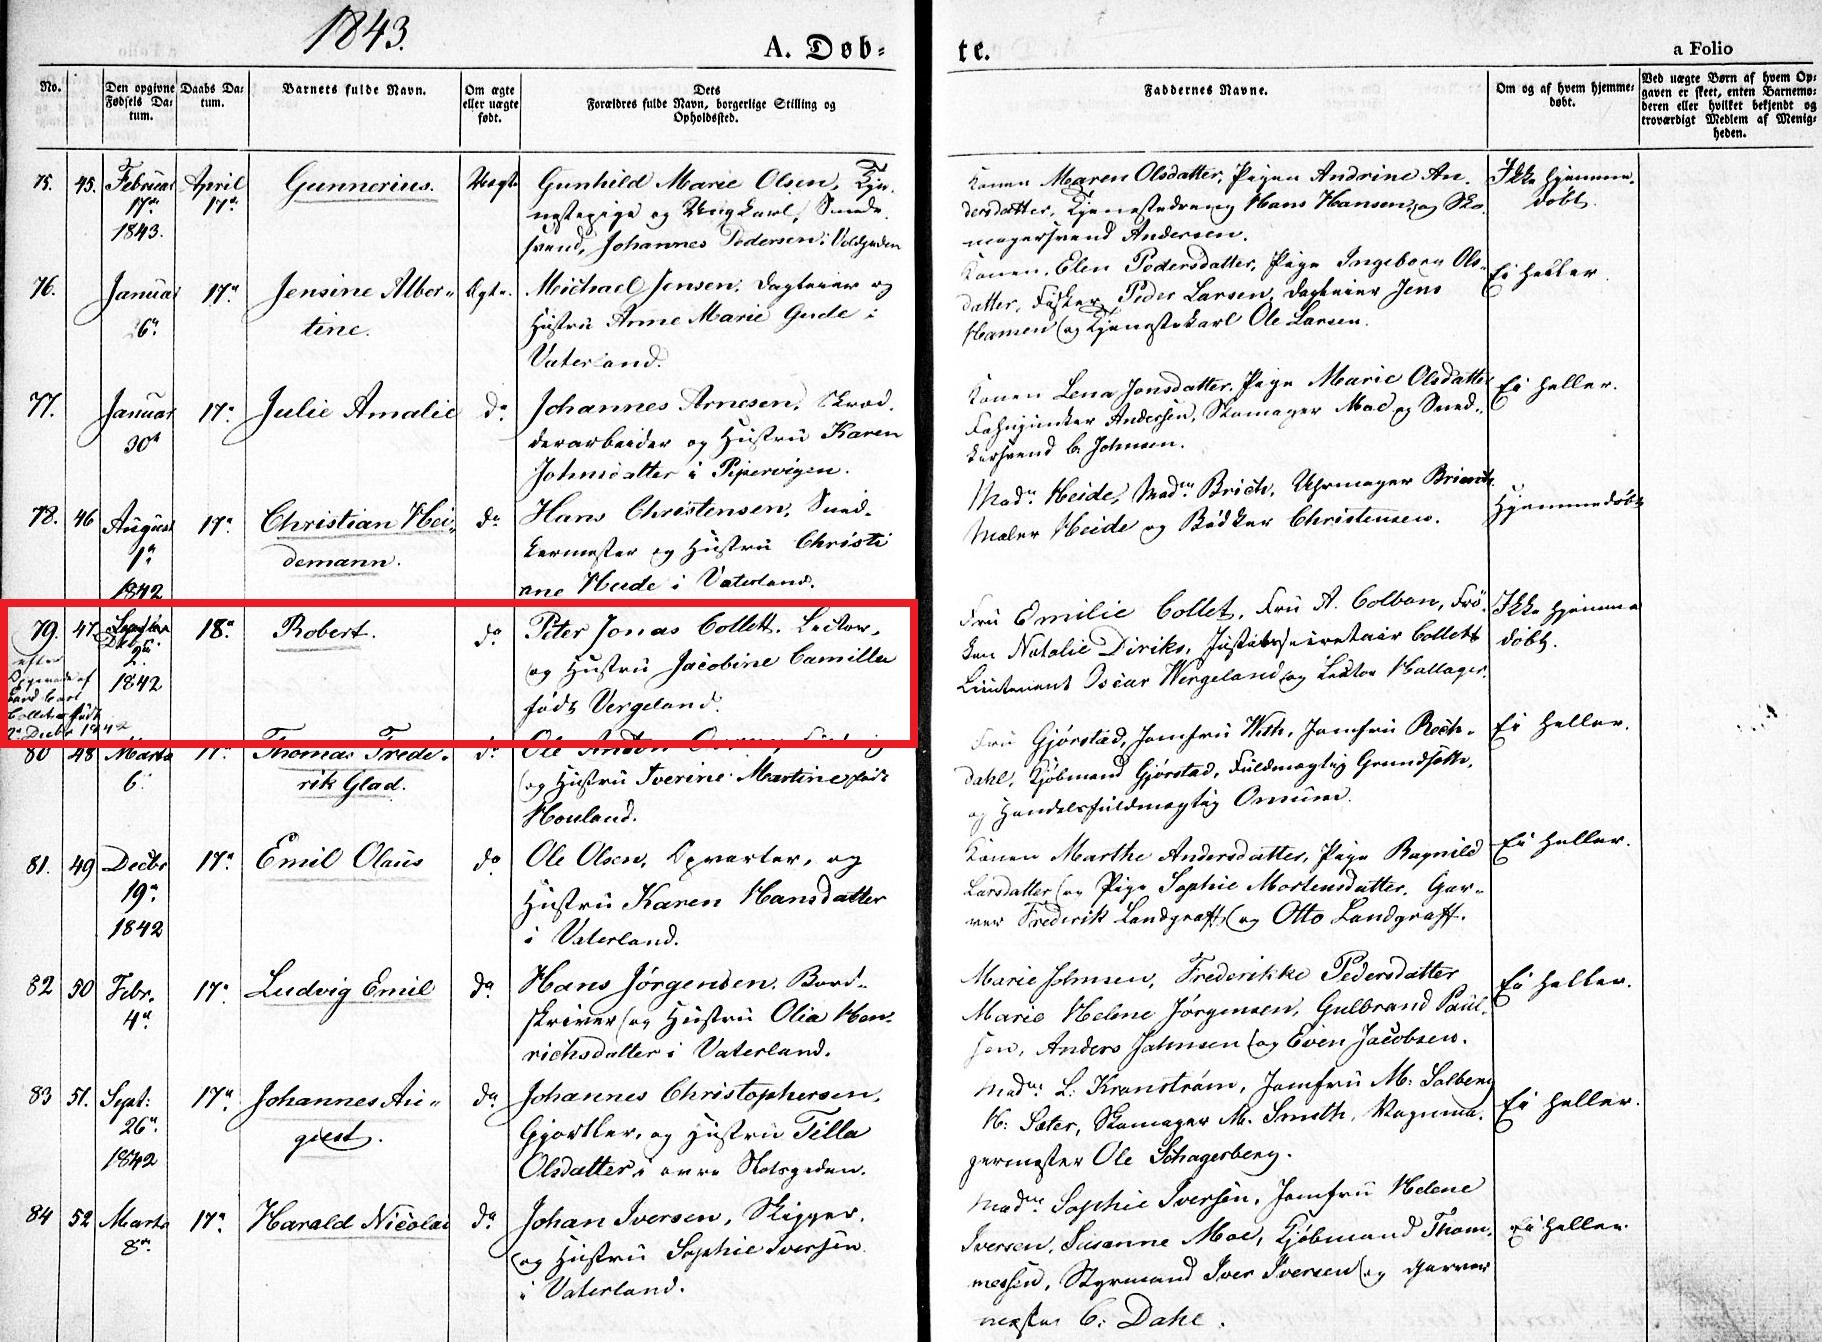 Baptism record of Robert Collett, 1843 [Credit: MyHeritage Norway Church Records, 1815-1938]